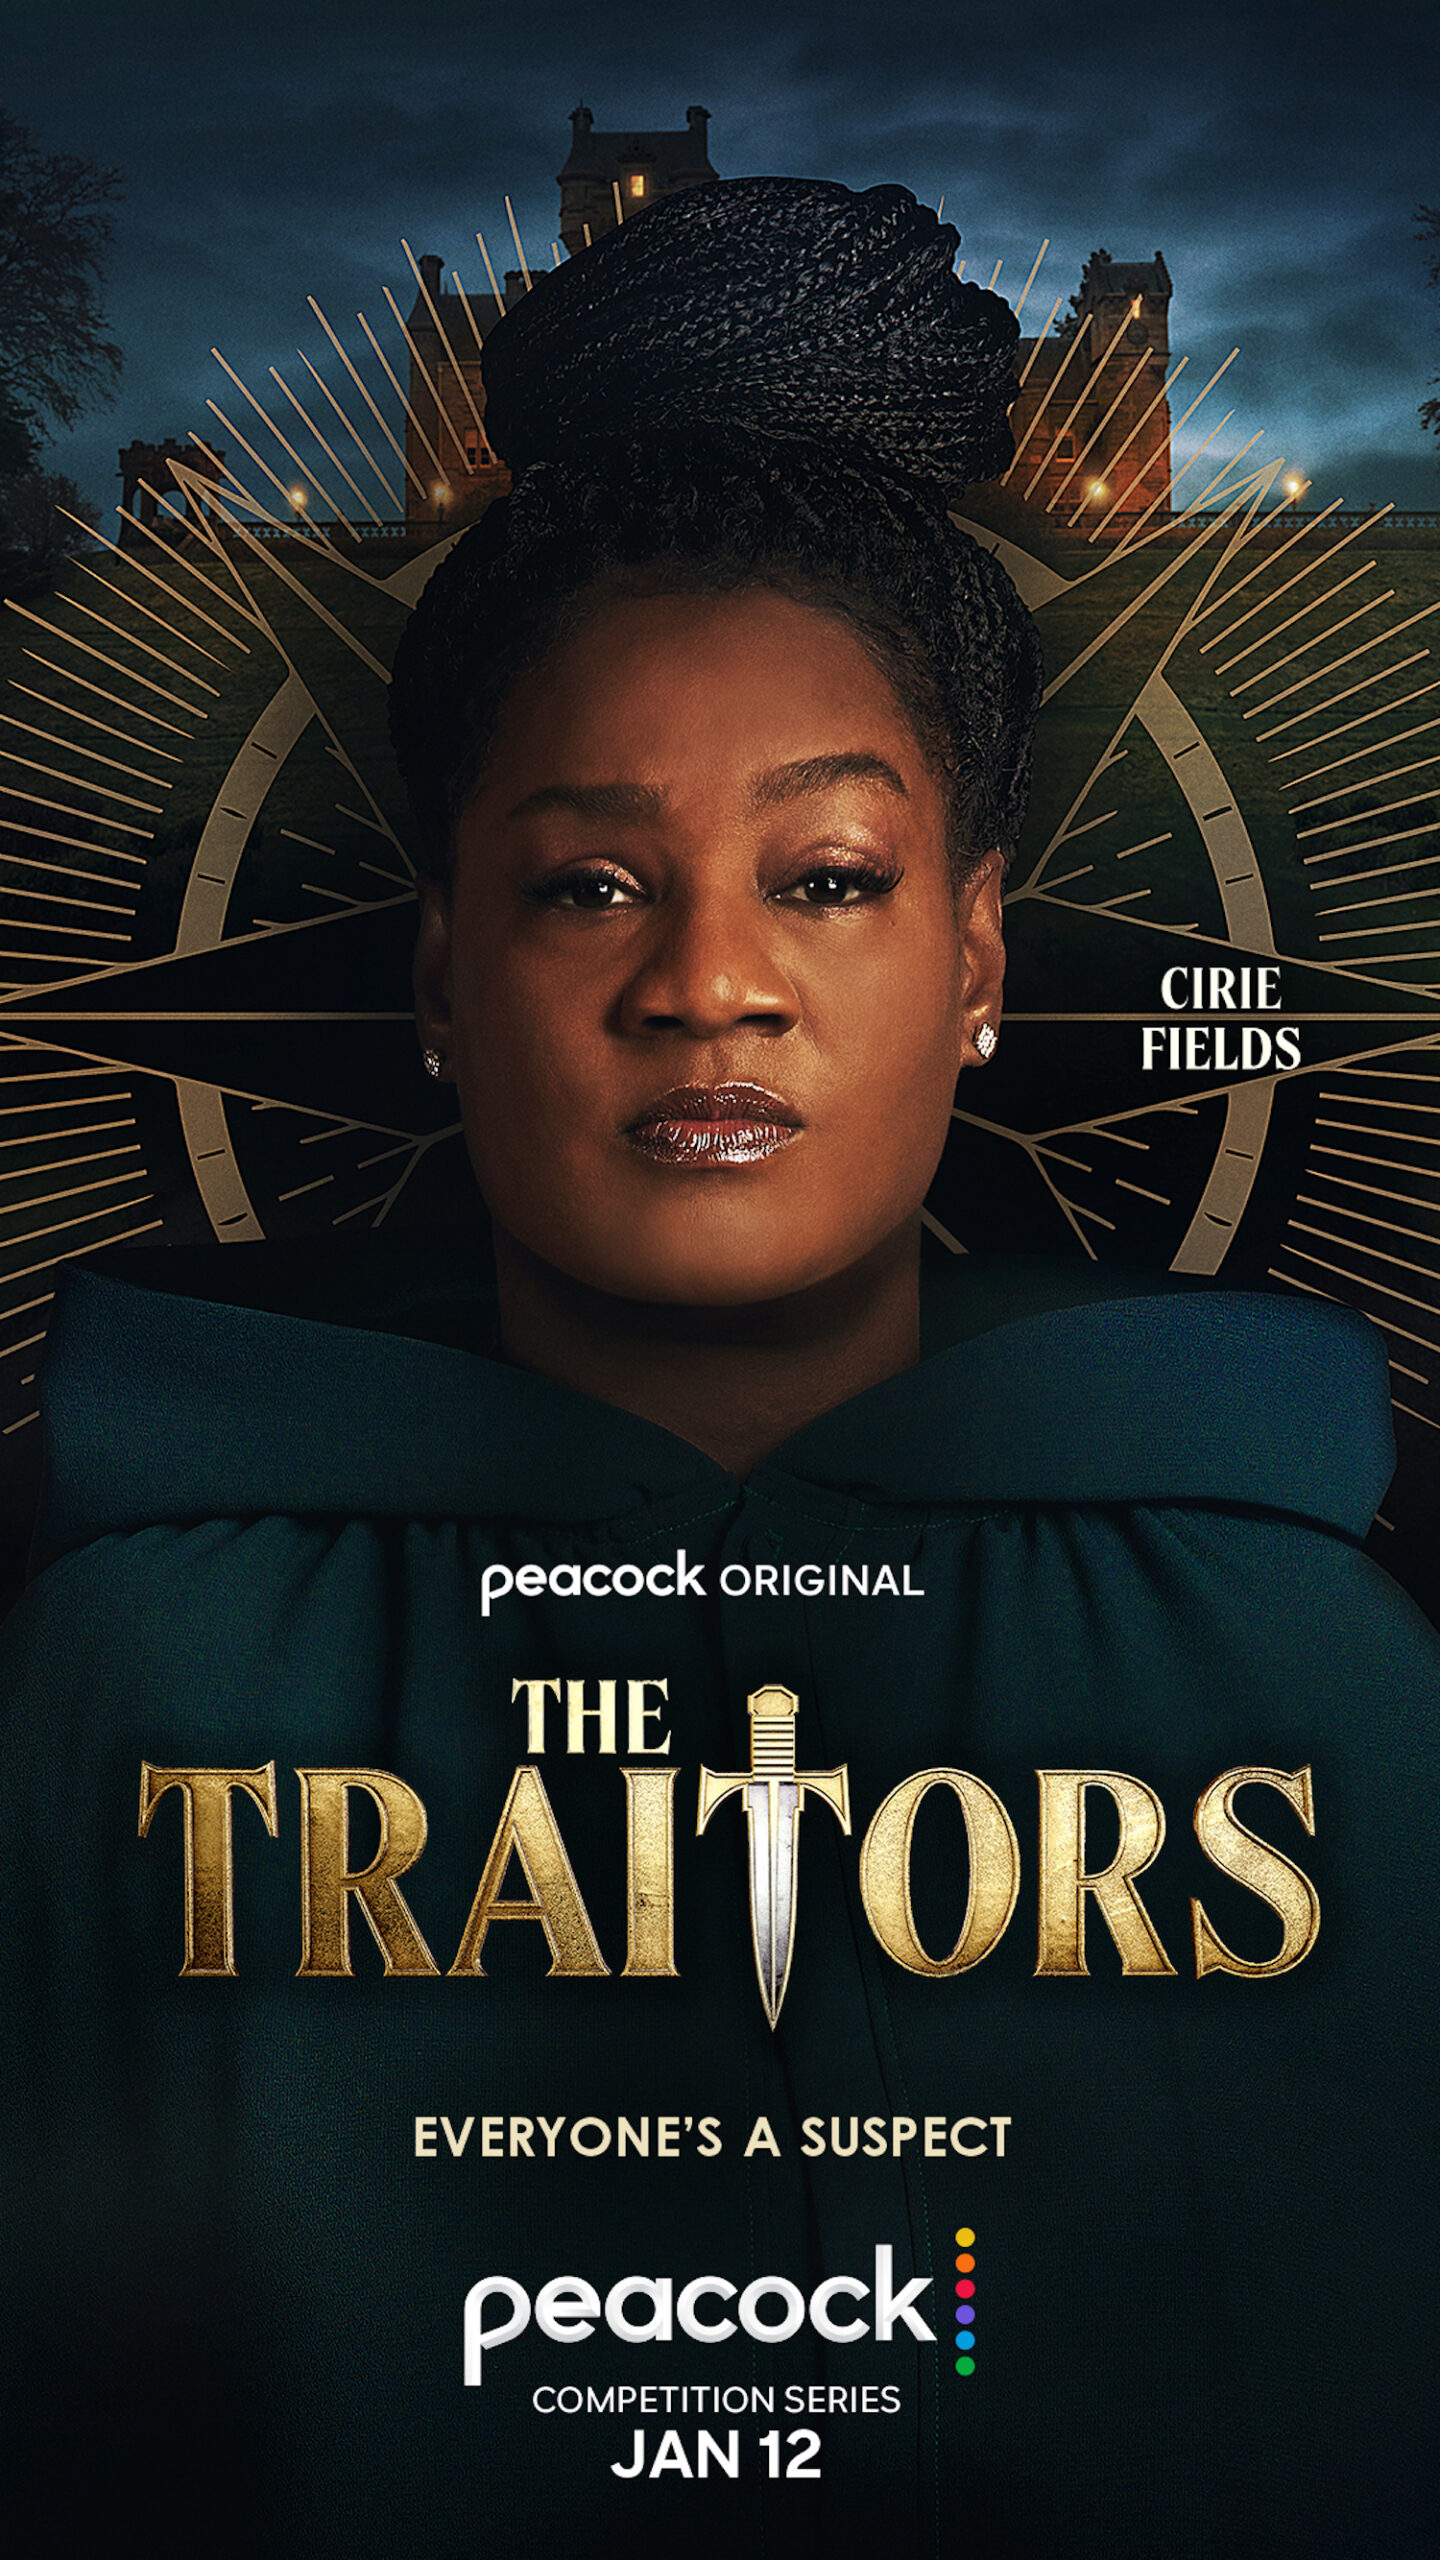 Cirie Fields for 'The Traitors'